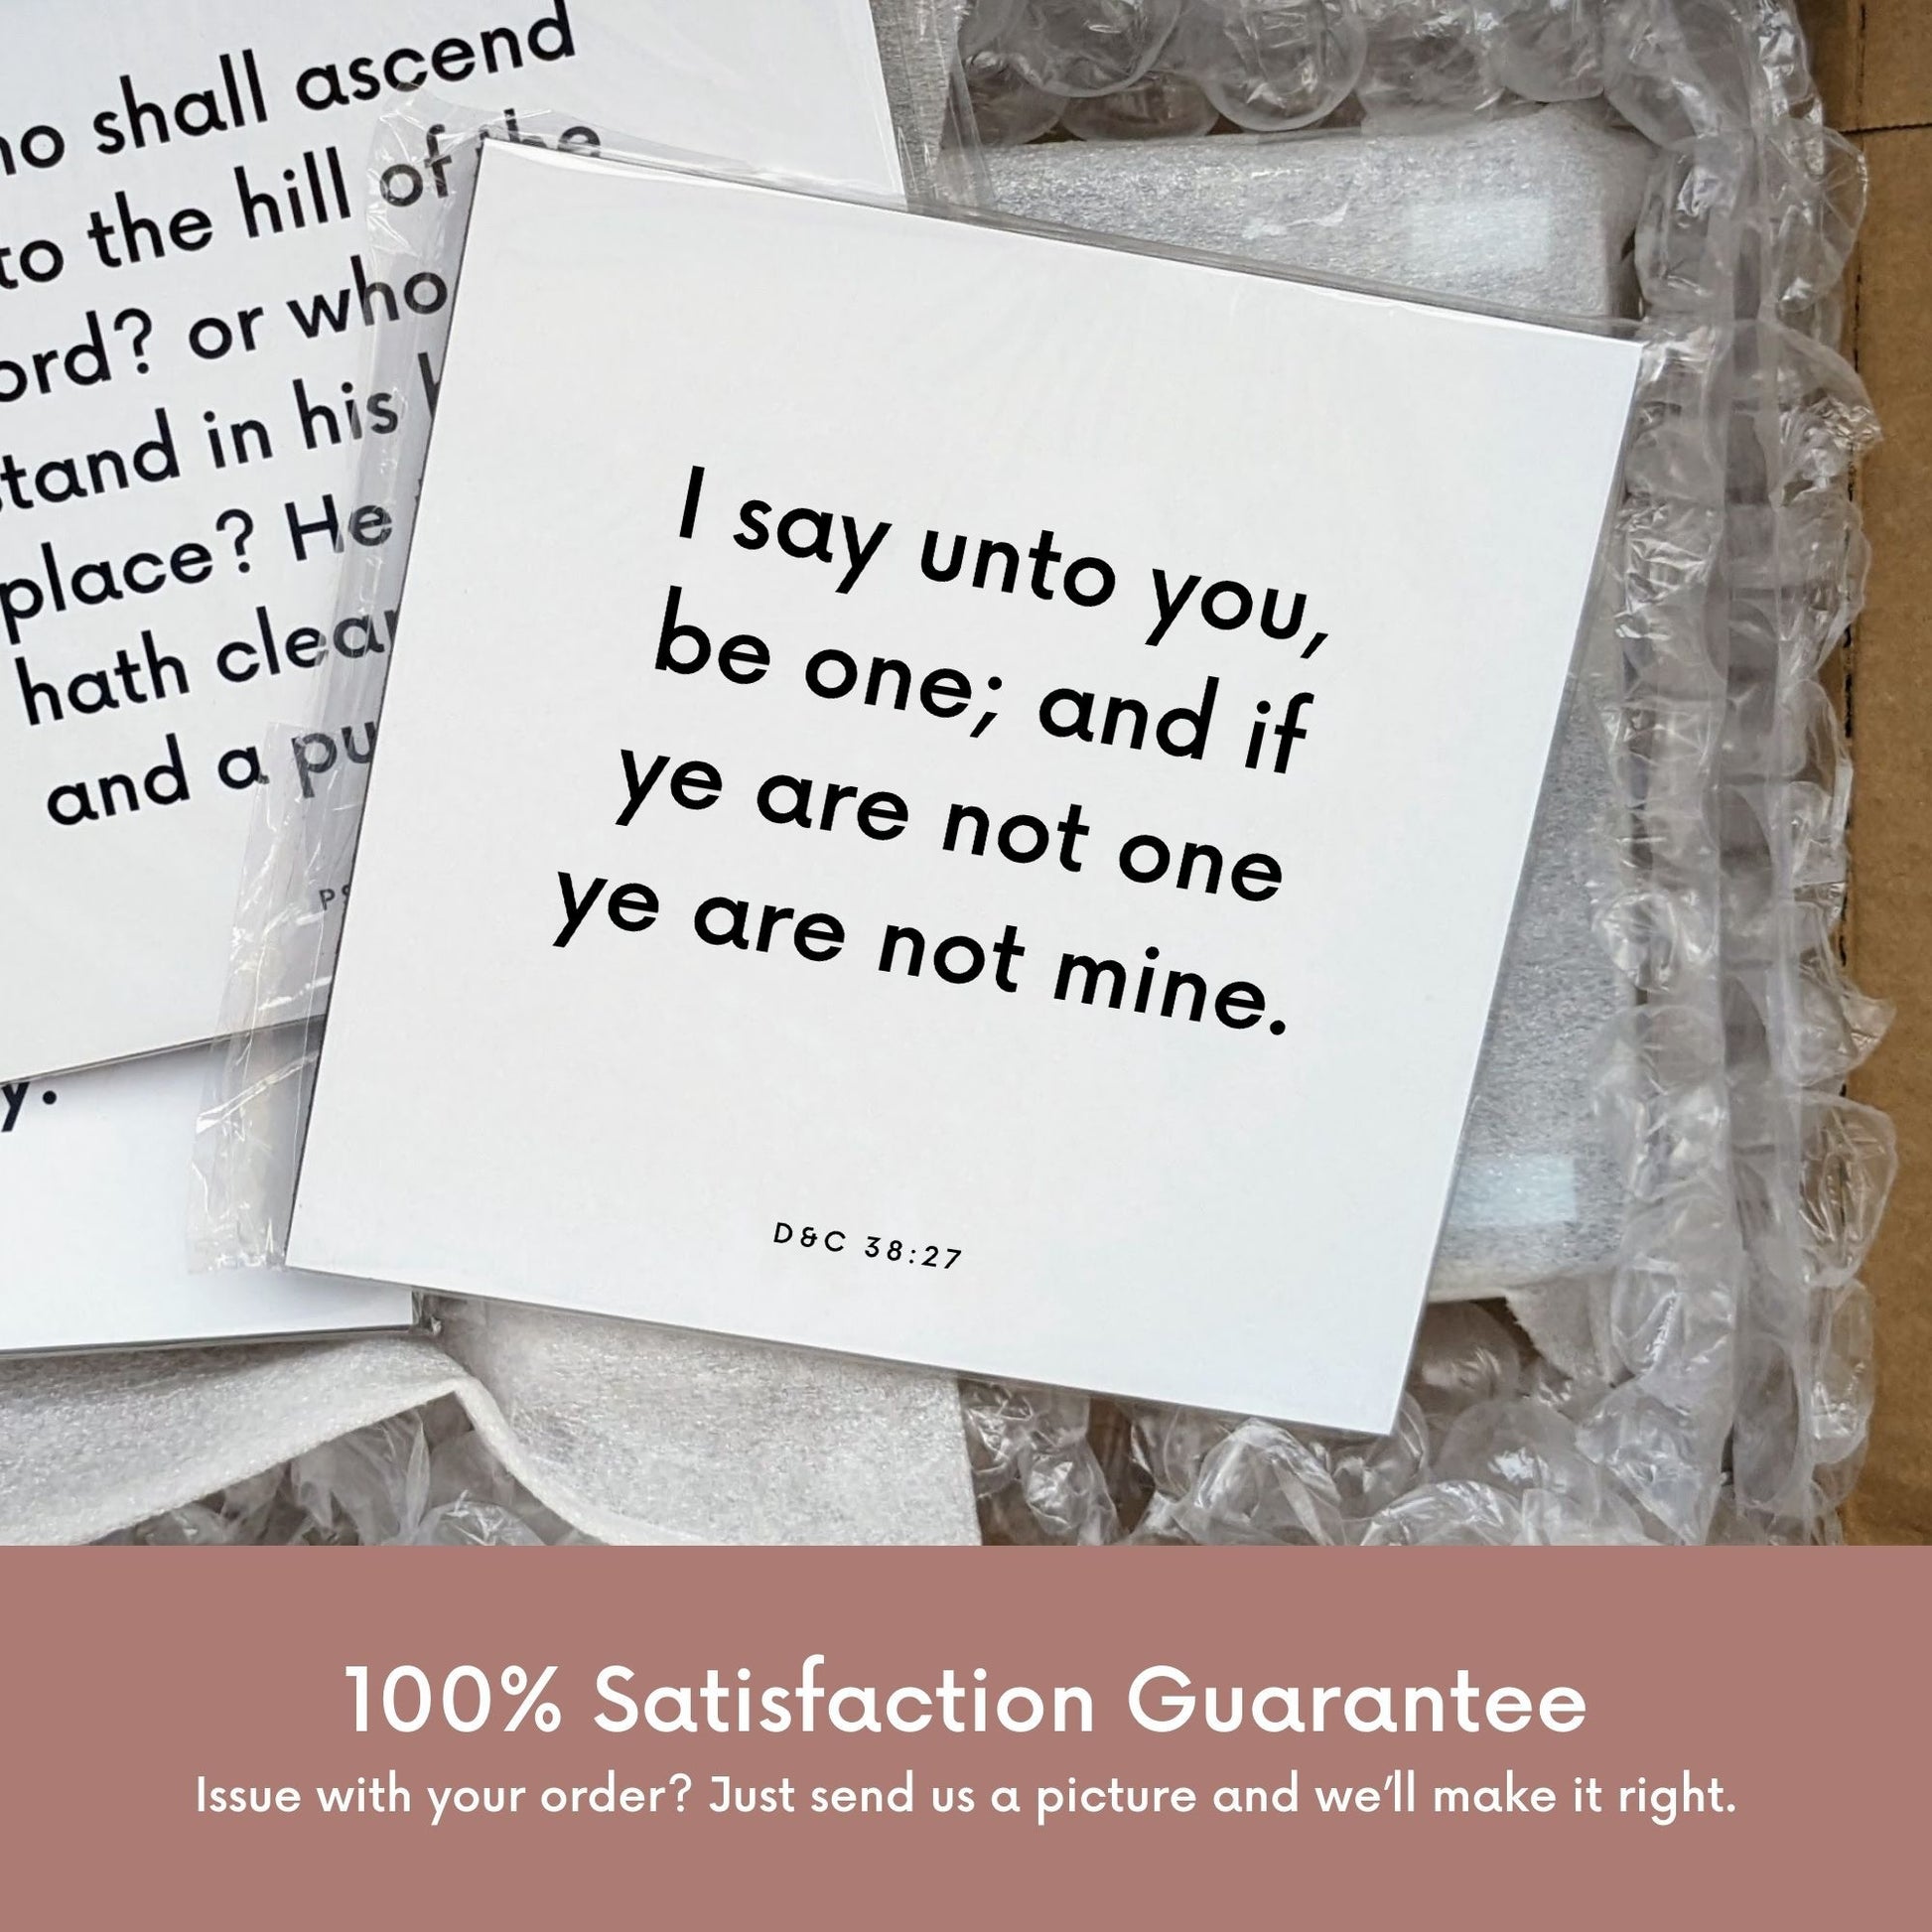 Shipping materials for scripture tile of D&C 38:27 - "I say unto you, be one; and if ye are not one ye are not mine"